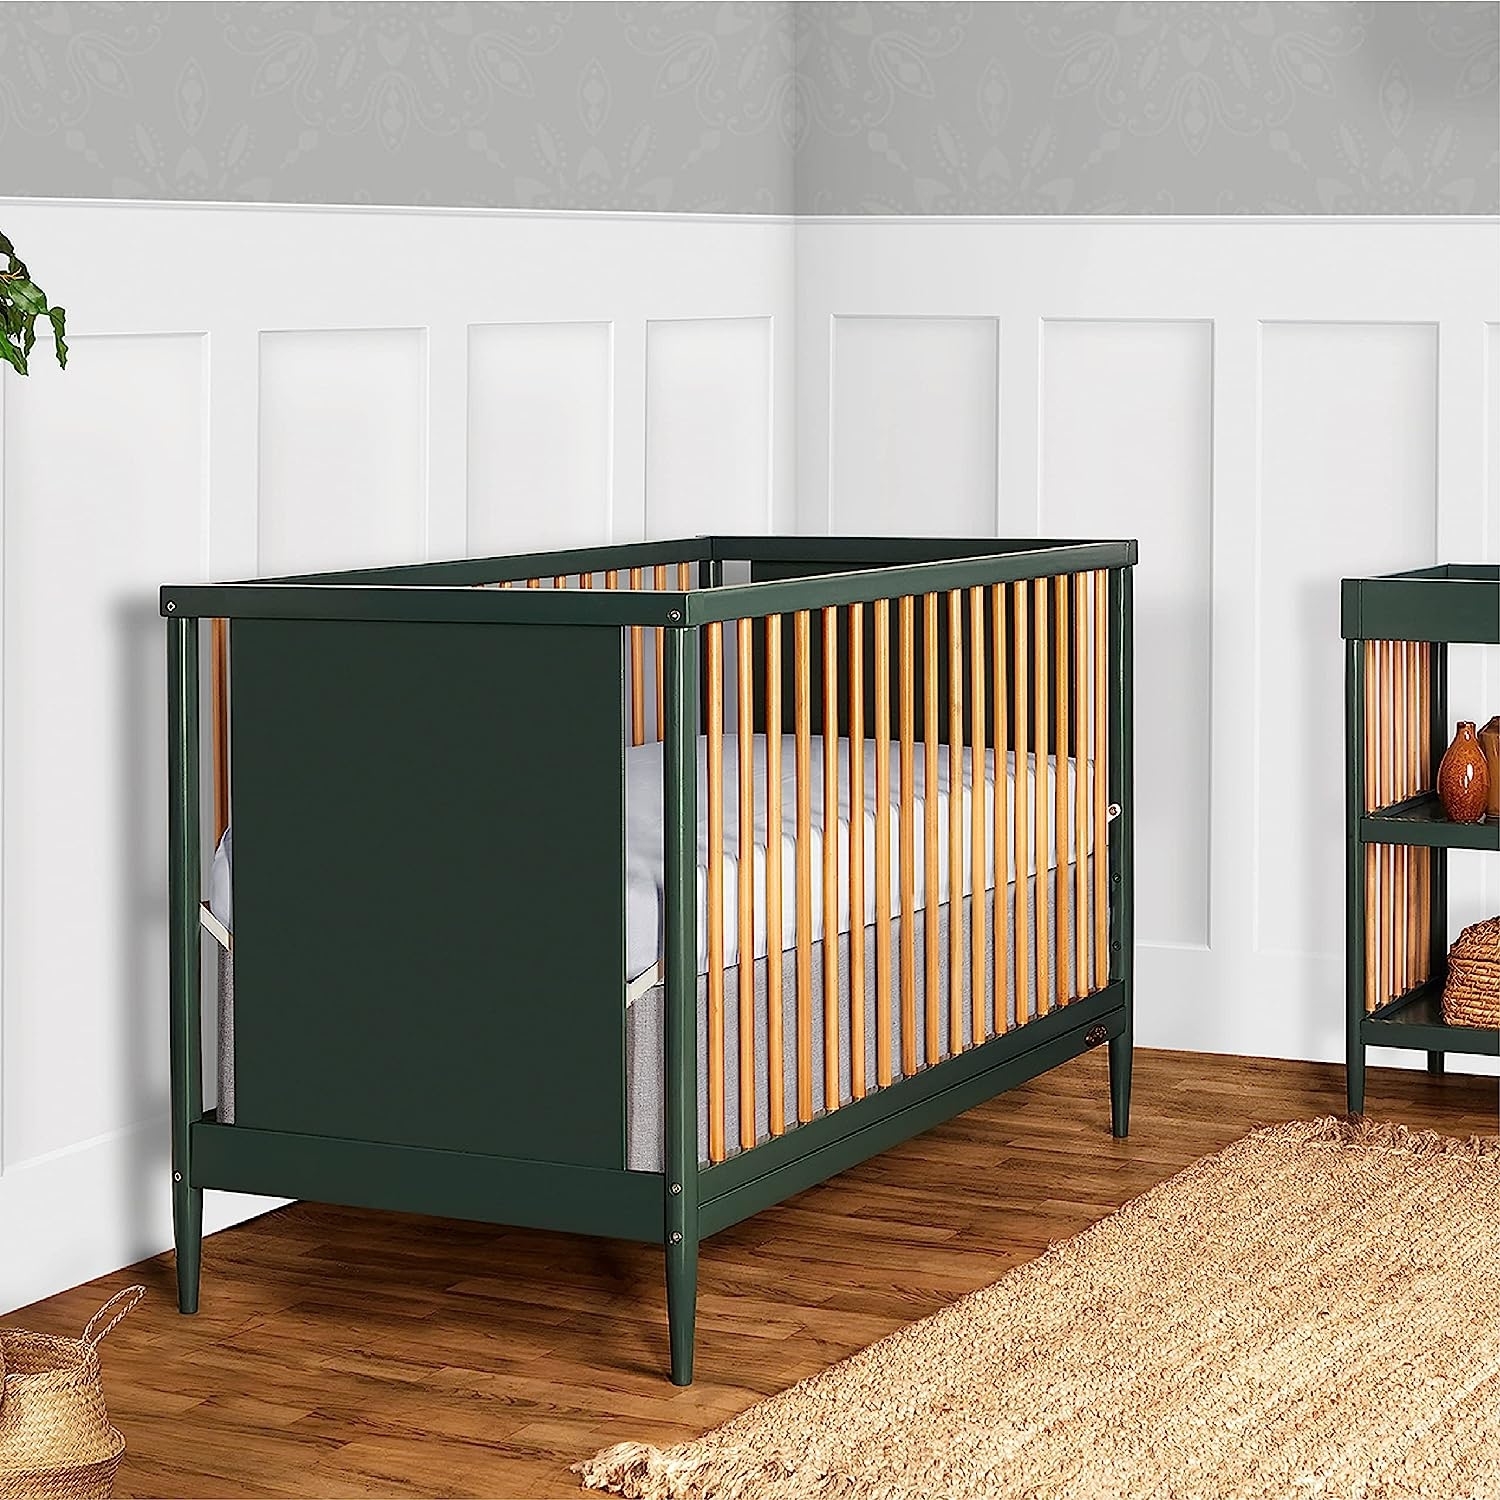 natural wood and green crib in nursery